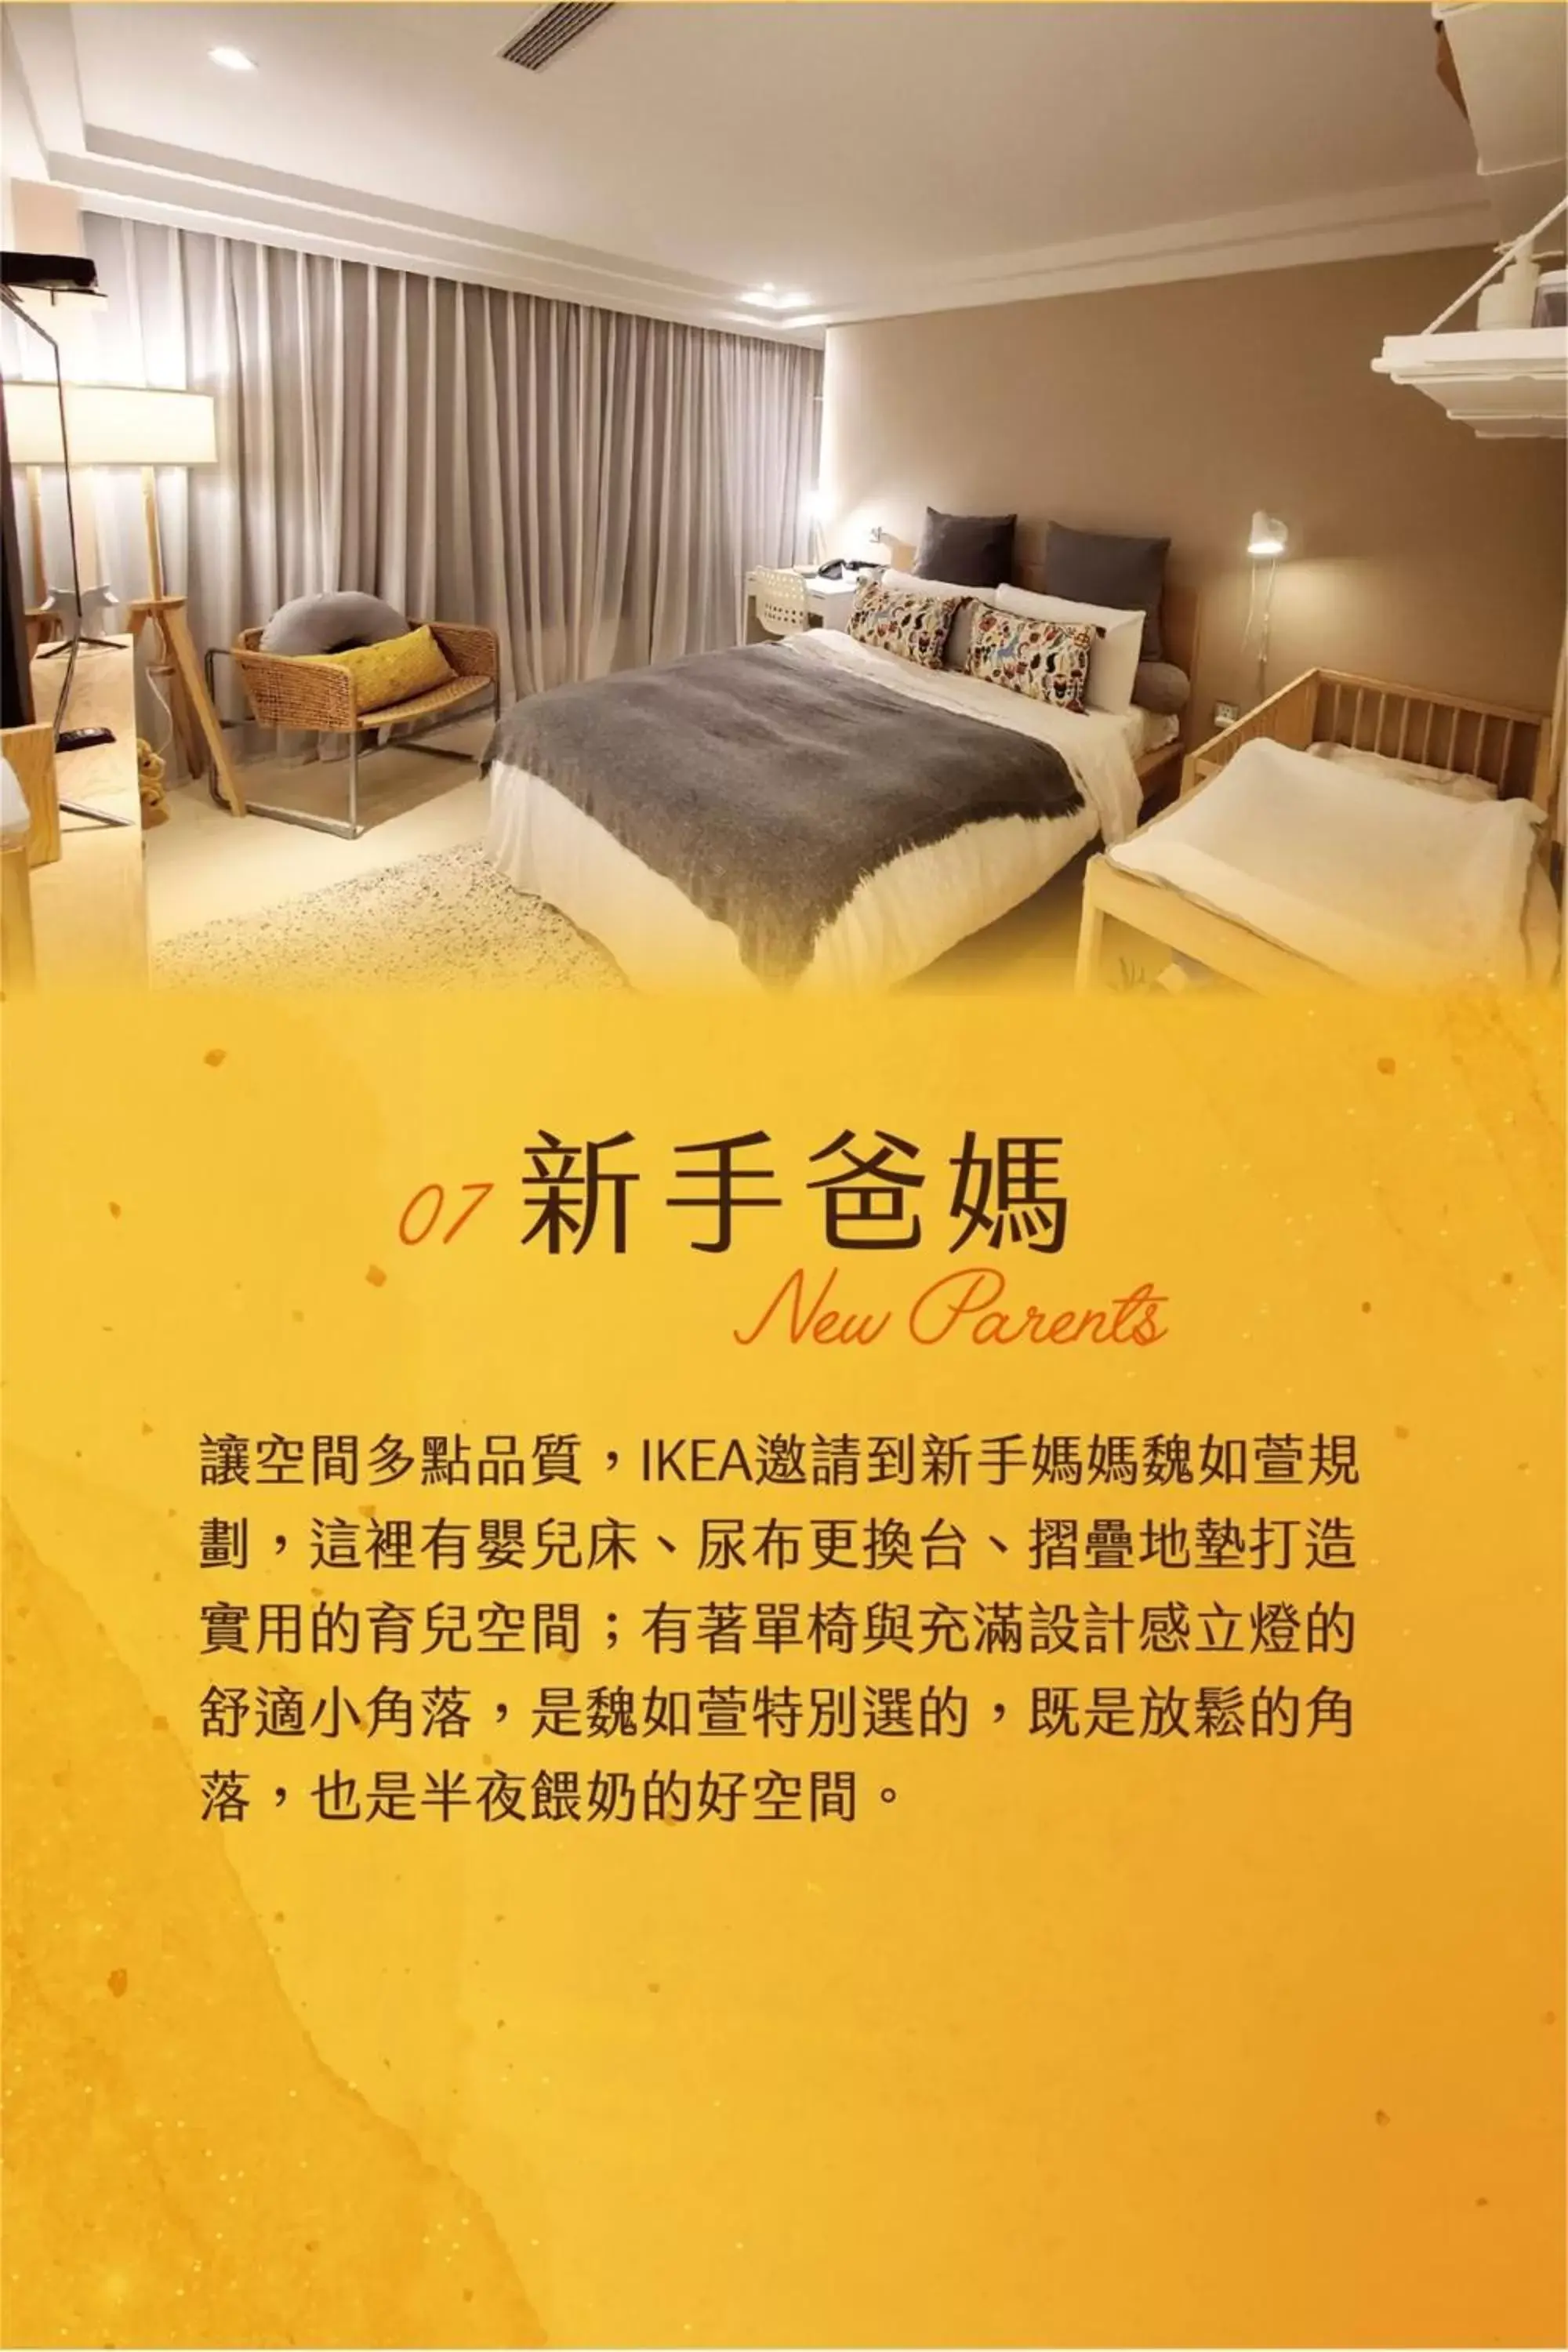 Photo of the whole room, Bed in Yomi Hotel - ShuangLian MRT